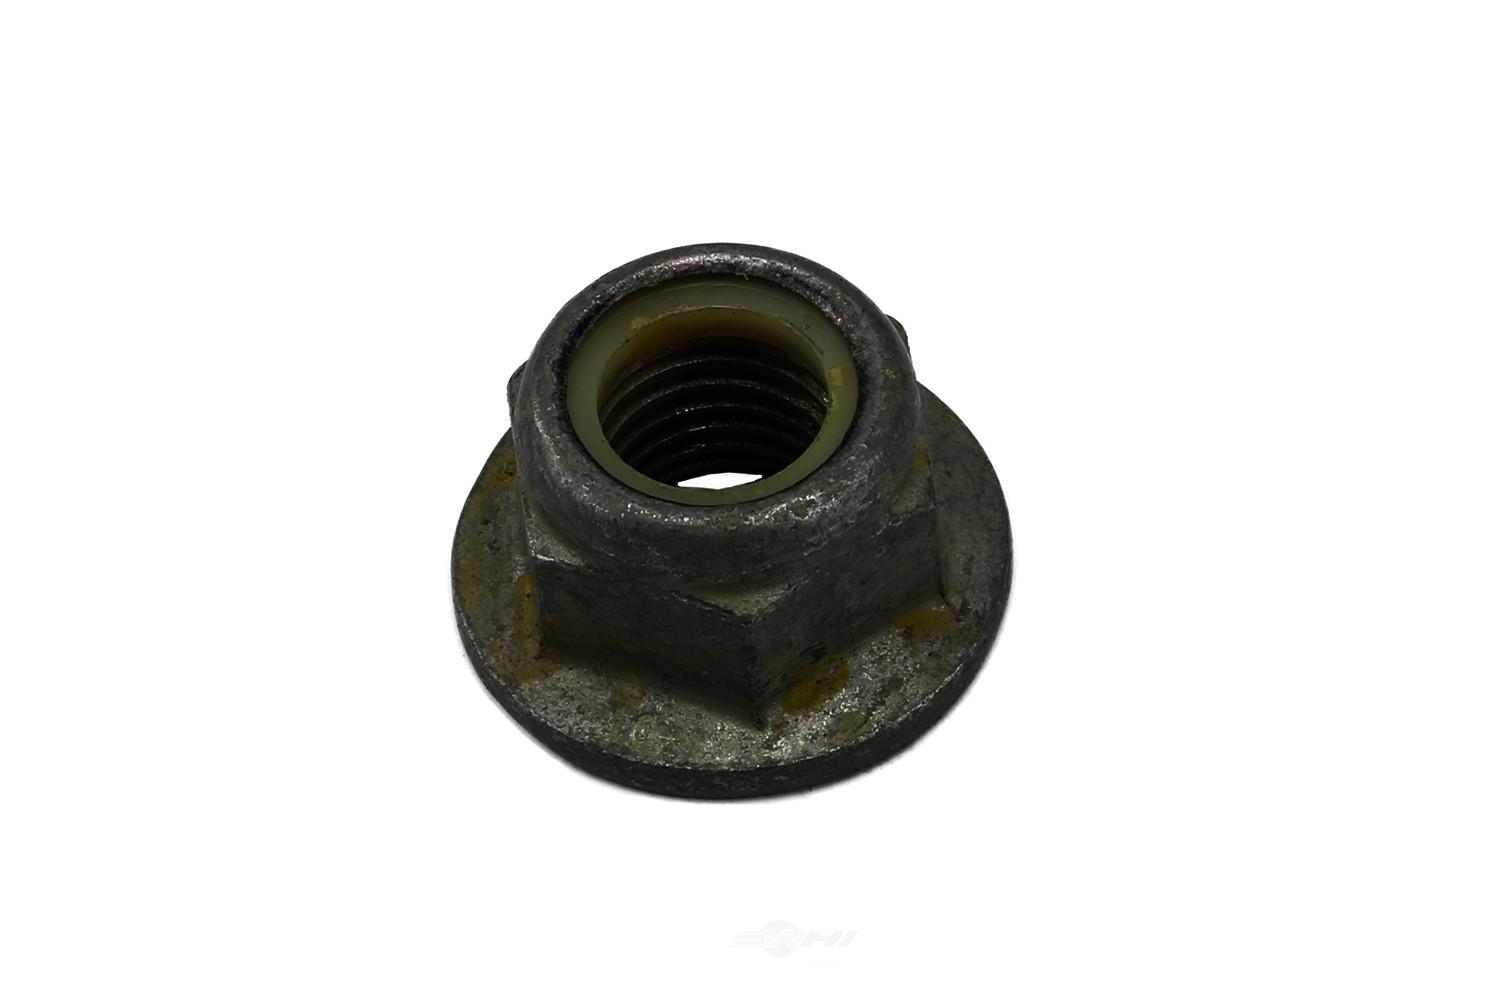 GM GENUINE PARTS CANADA - Suspension Ball Joint Nut / Washer - GMC 11611337